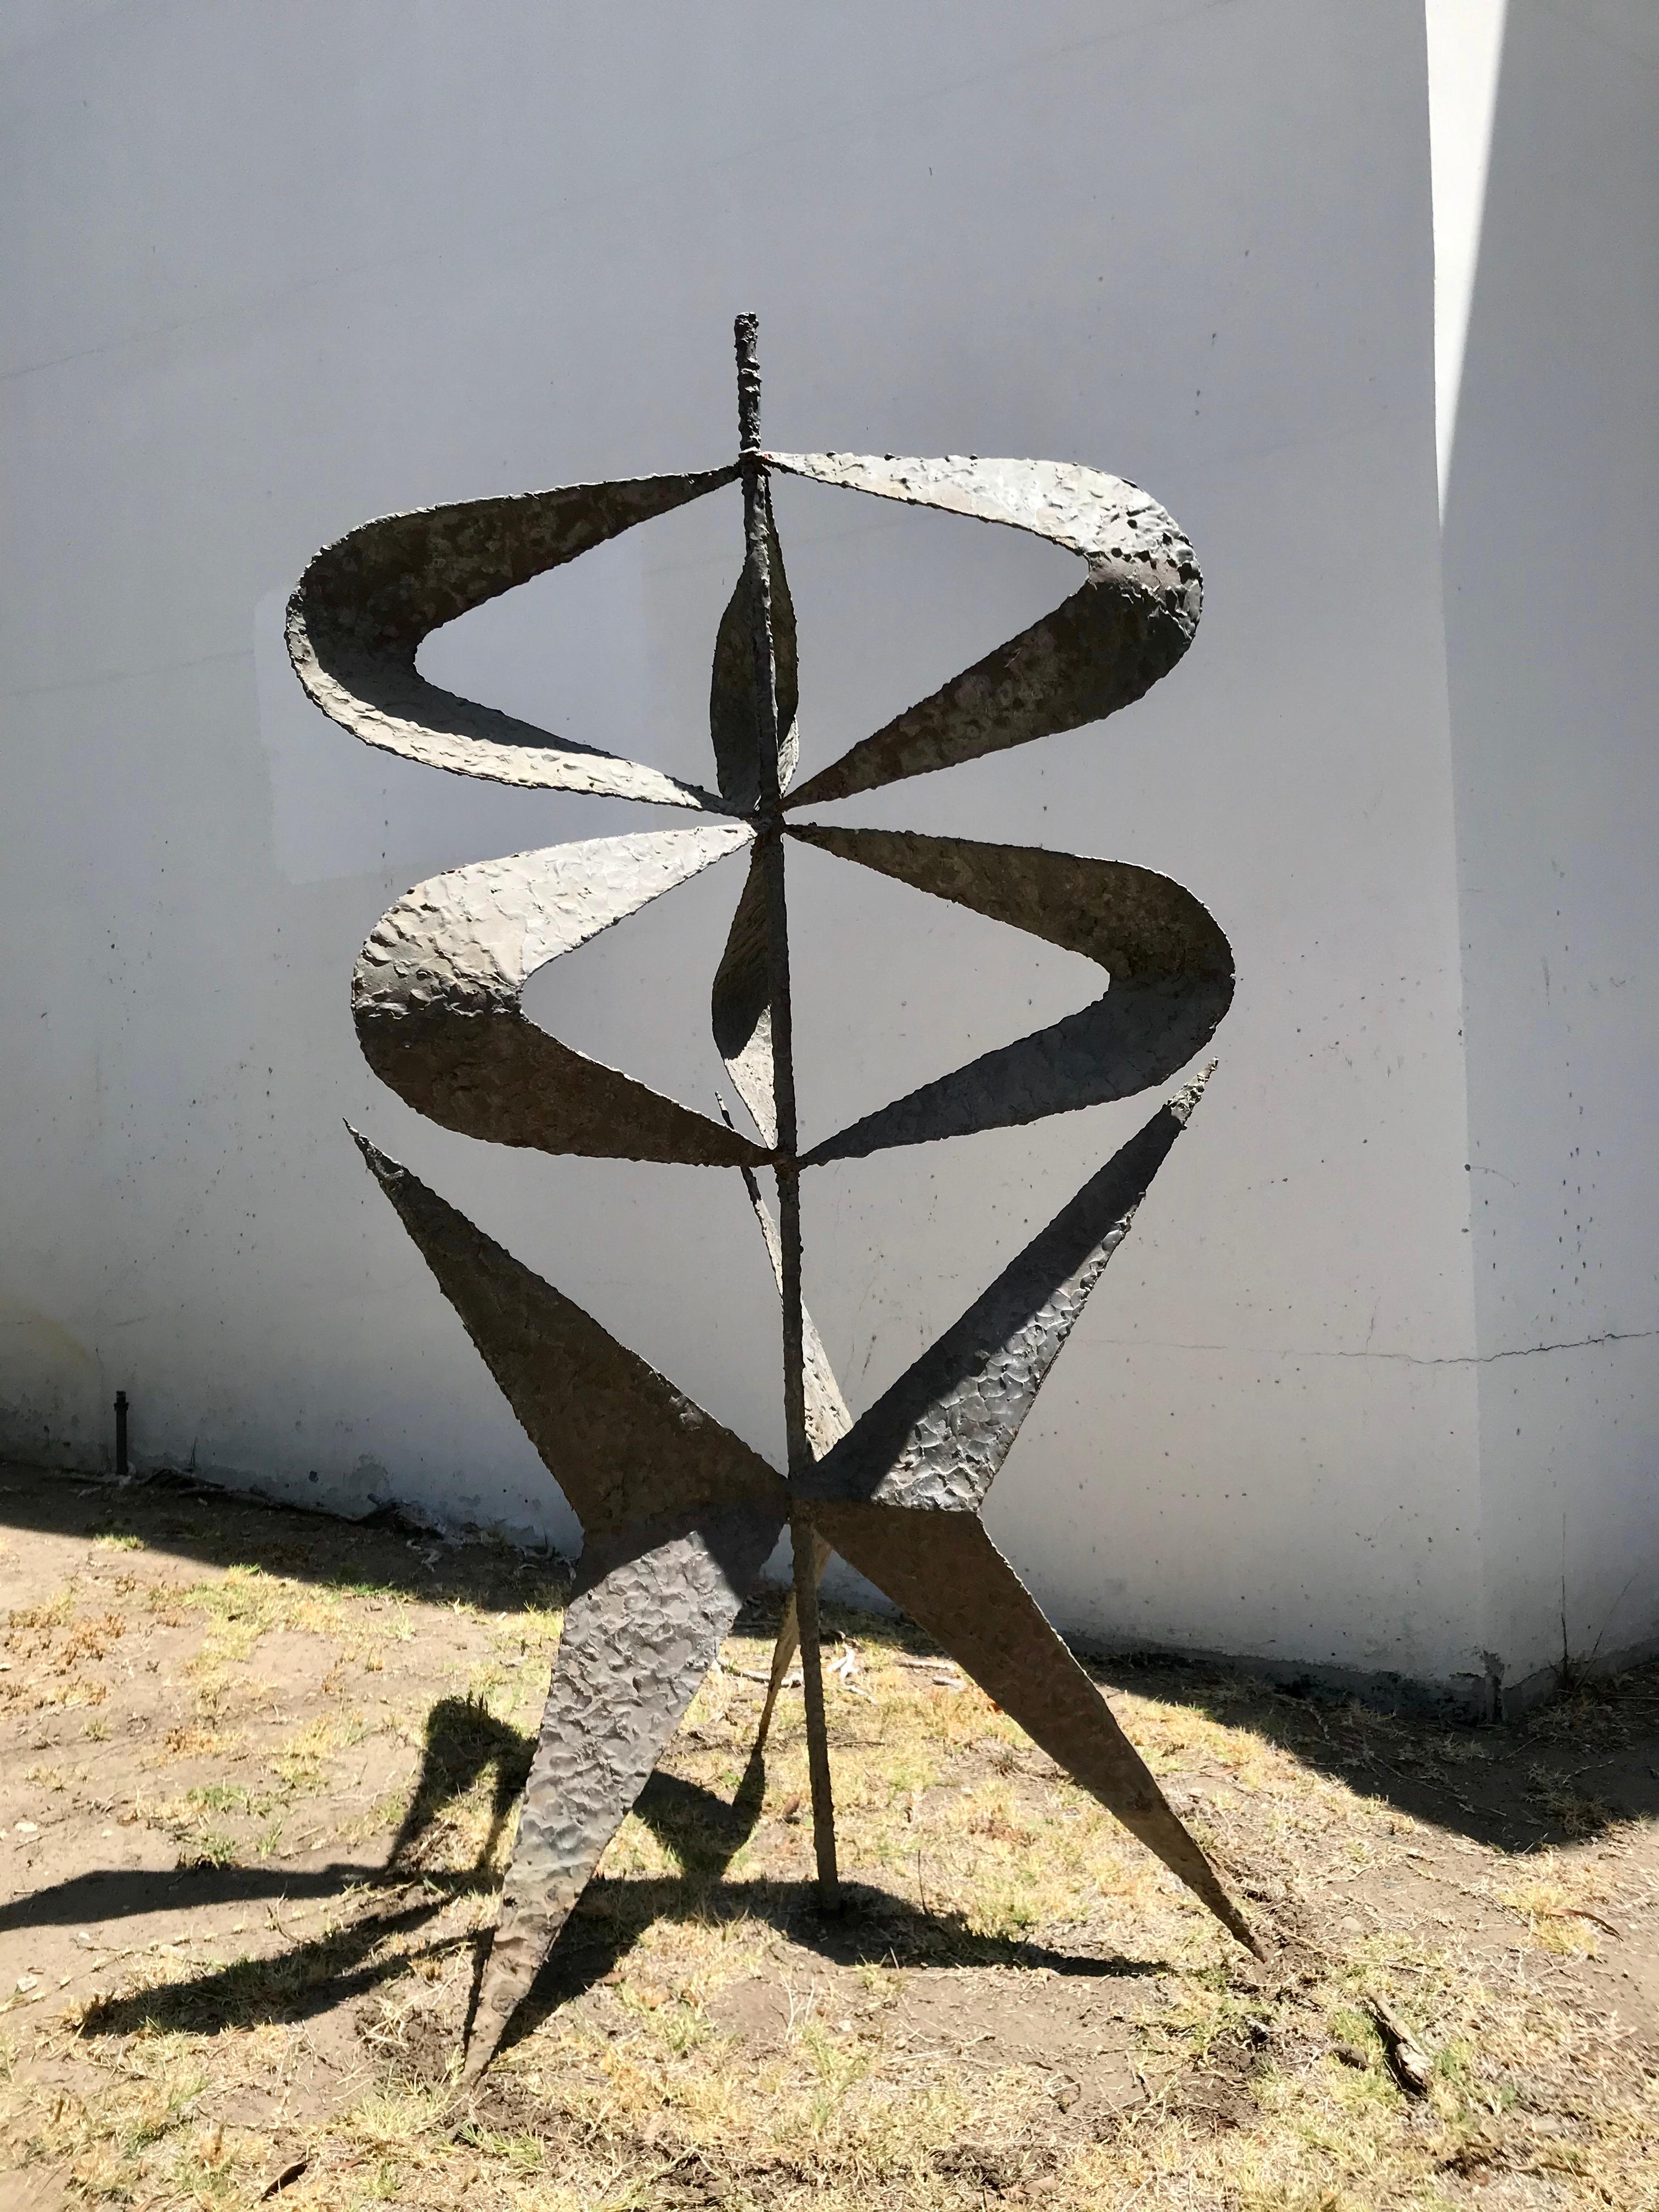 This great piece of modern art appears to be a site specific piece.
It was salvaged from a mid century modern post & beam house in Beverly Hills designed by Buff, Straub & Hensman.
welded steel with brutalist molten bronze beading and verdigris